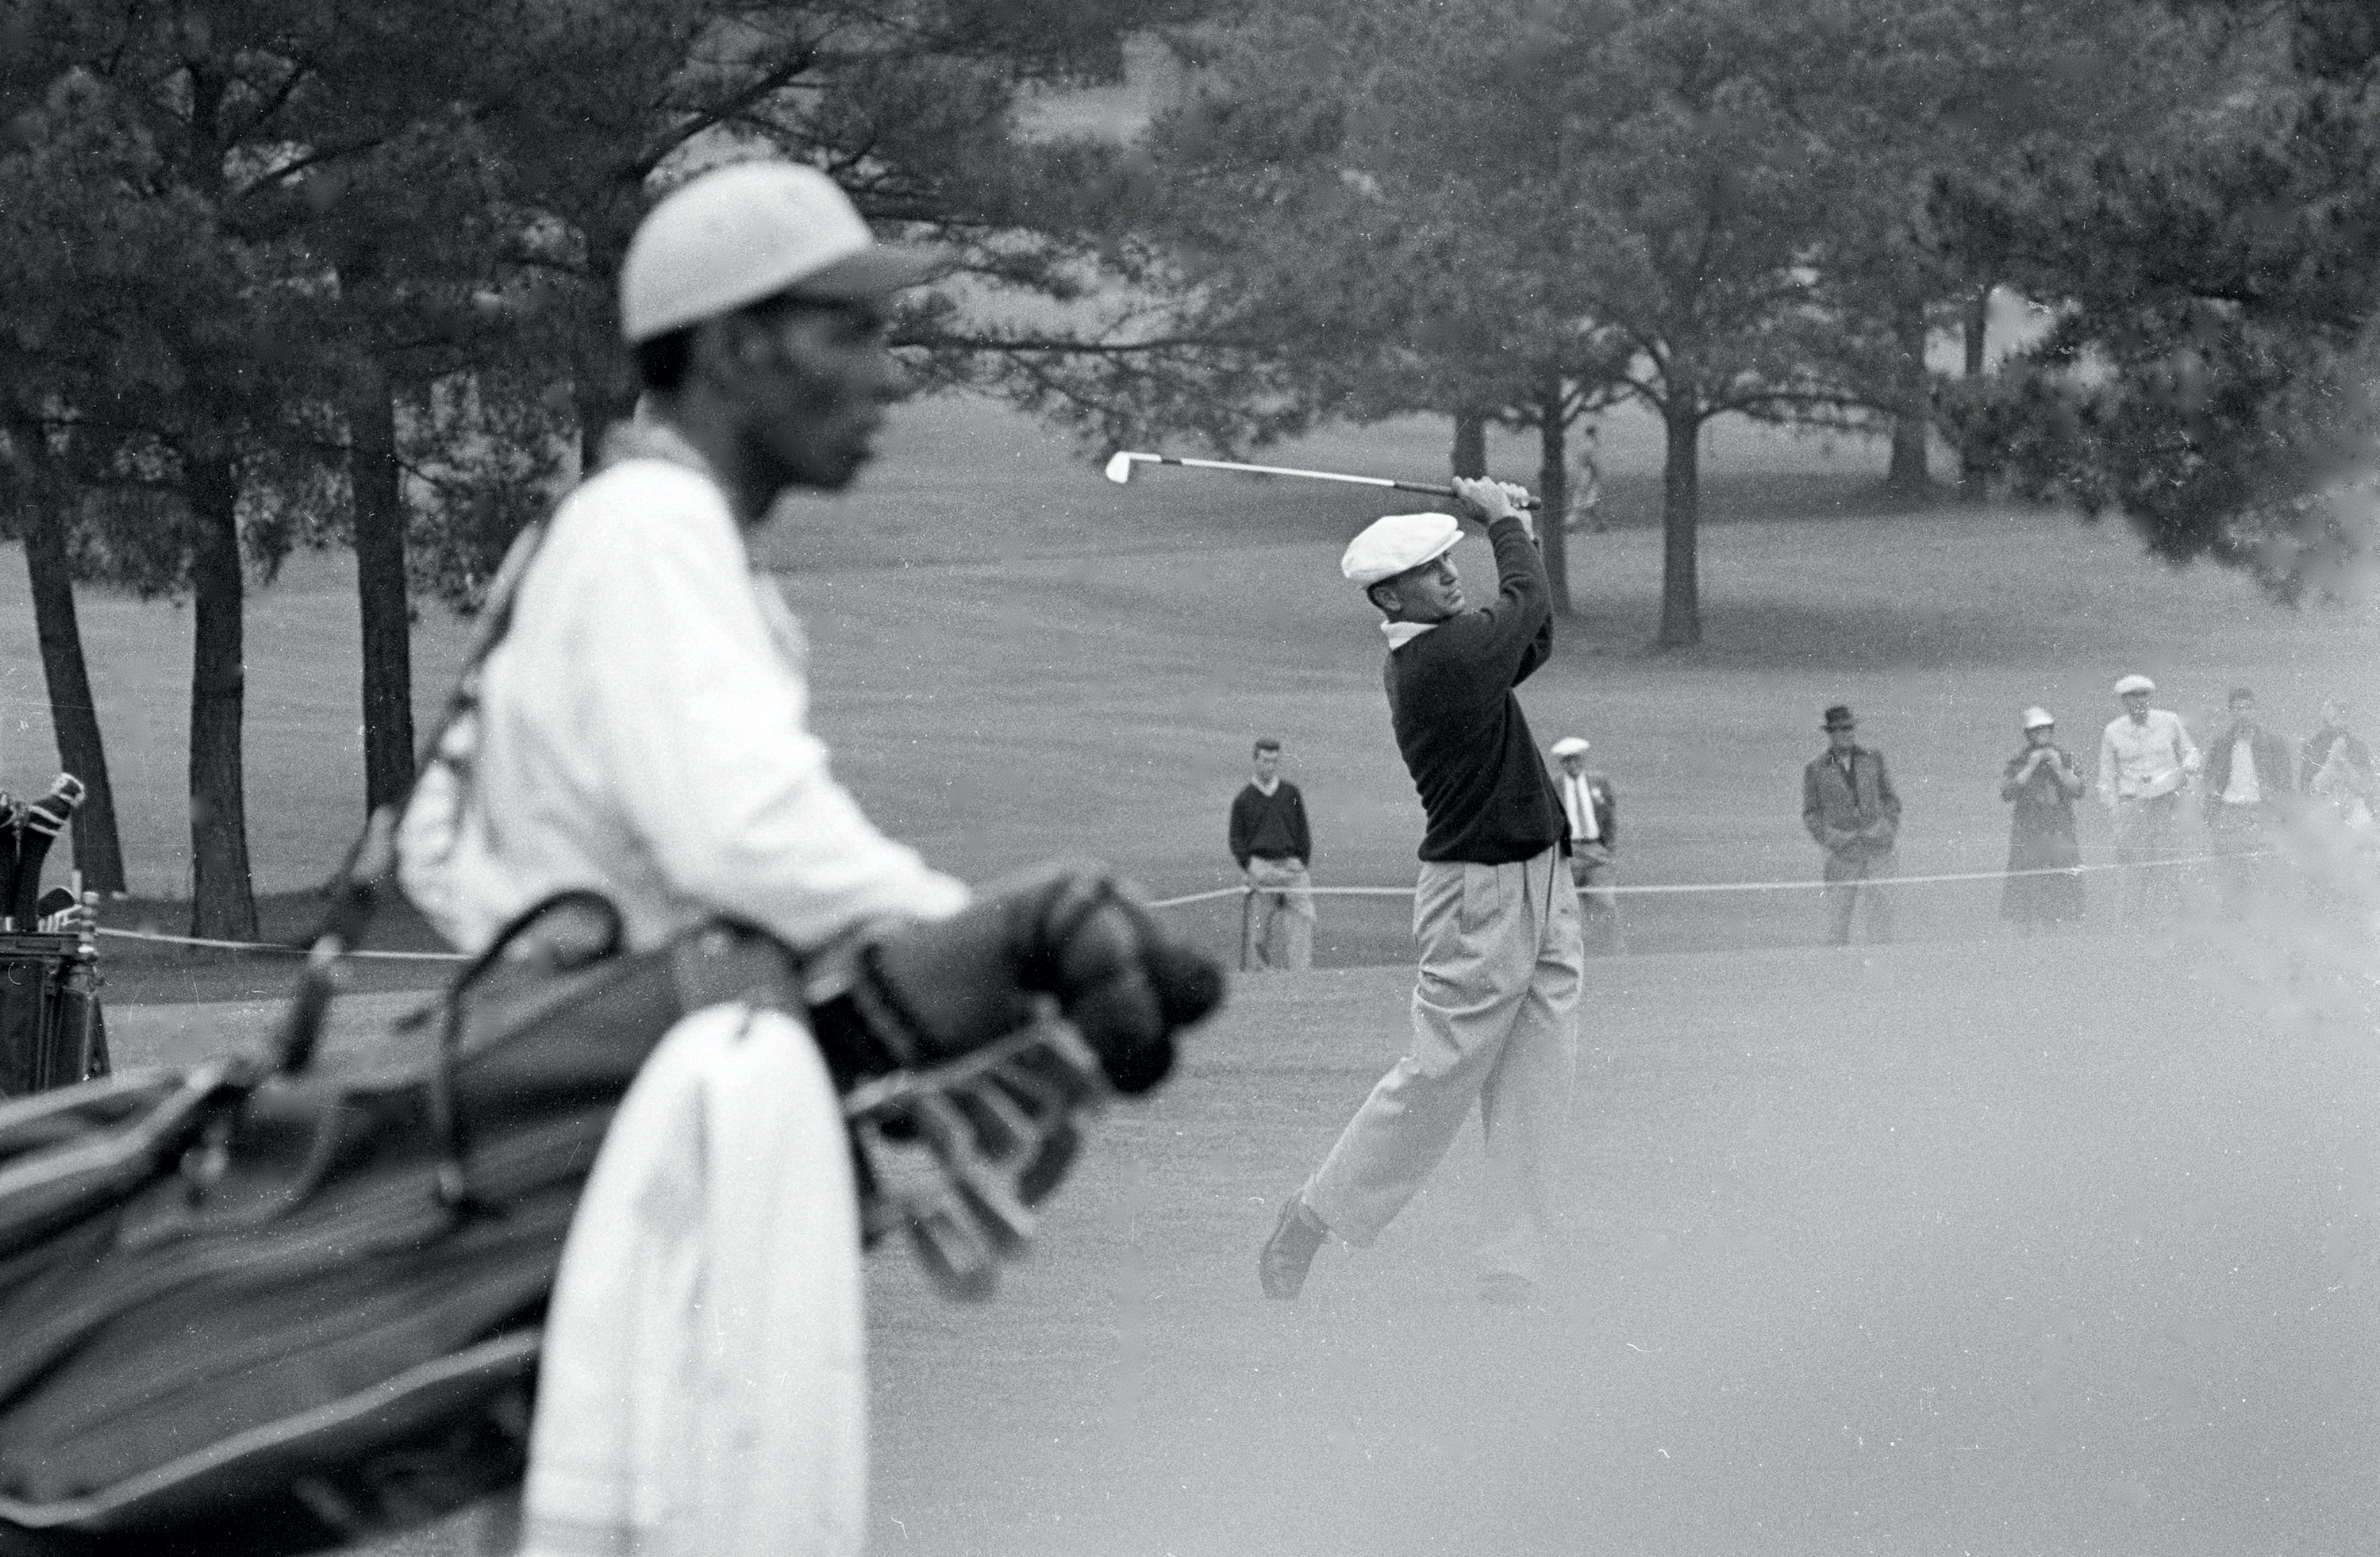 A Black caddie stands in the foreground as a man swings a golf club on the green